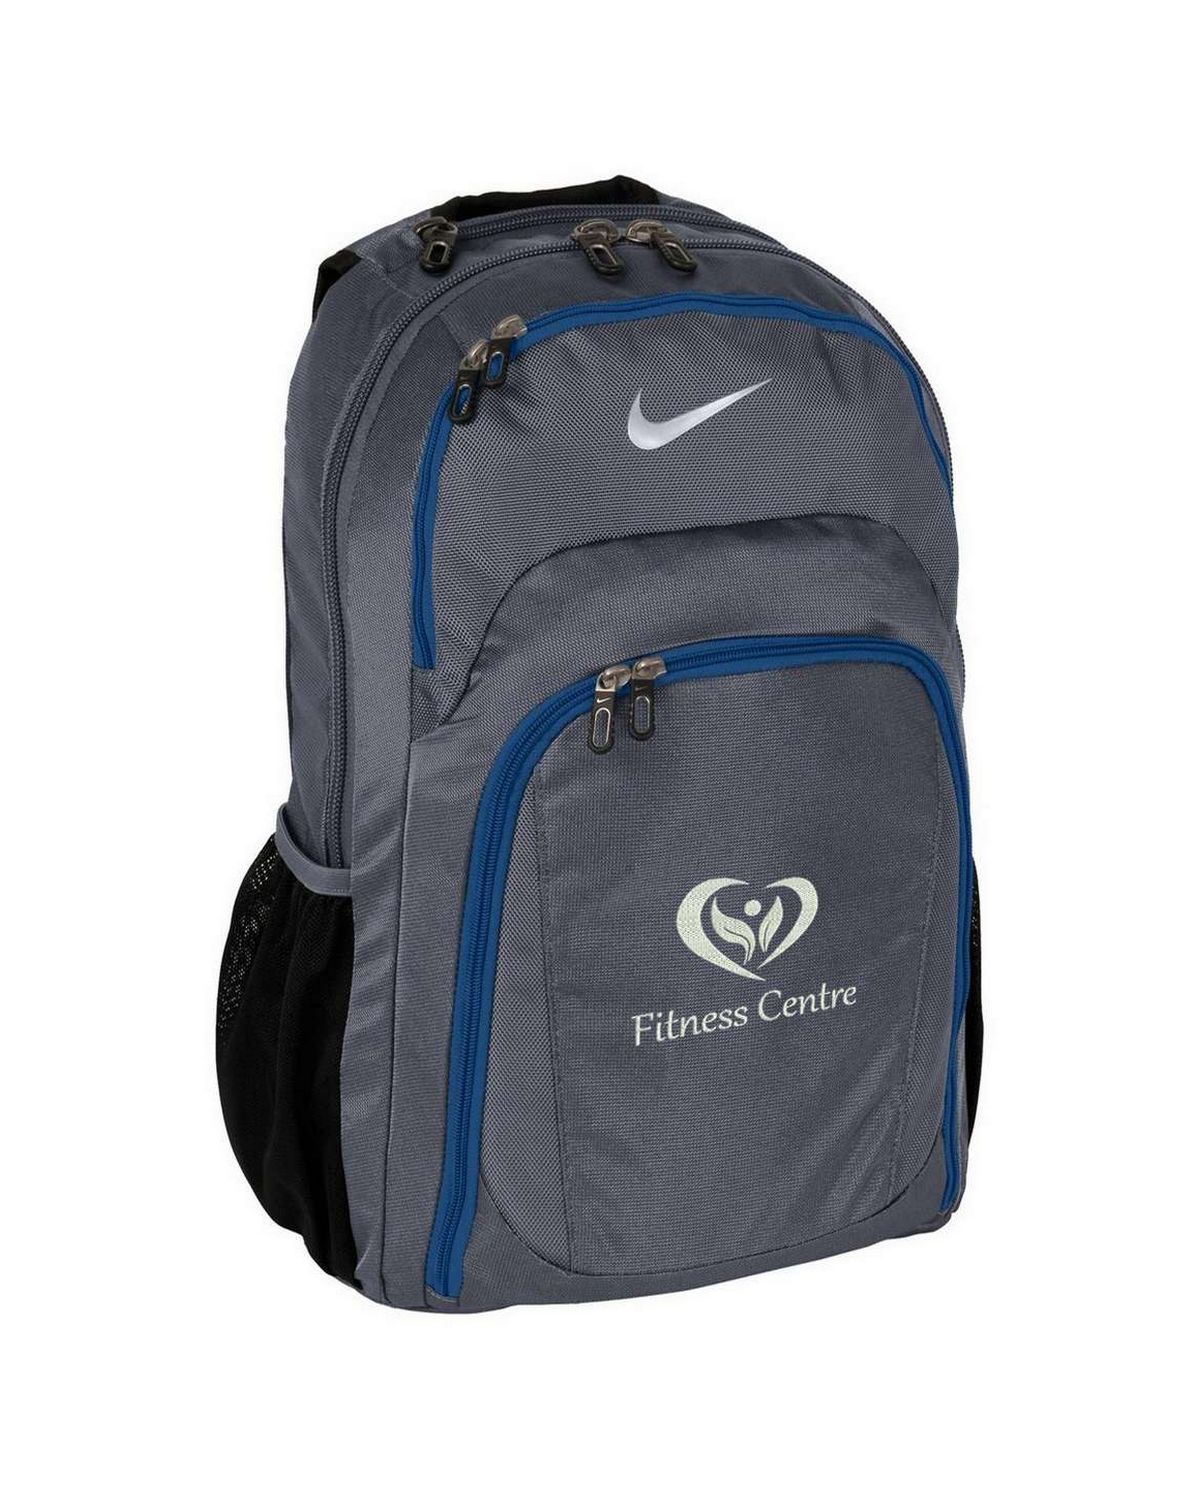 Nike Golf Logo Embroidered Performance Backpack at ApparelnBags.com